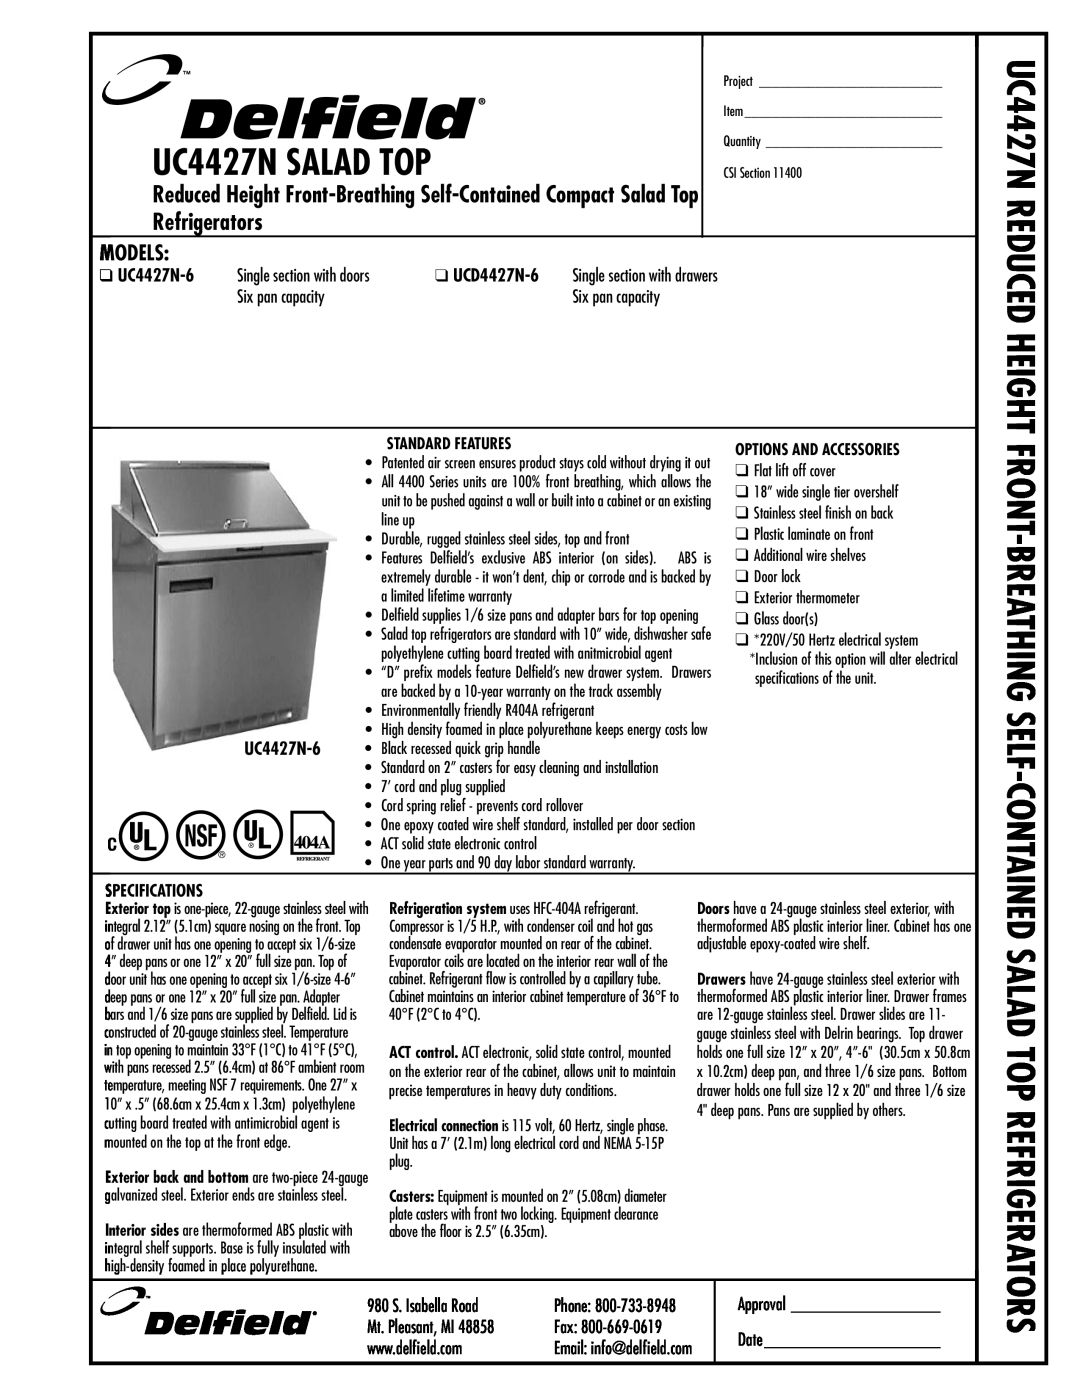 Delfield UC4427N-6 specifications Front-Breathing Self-Contained, Salad Top Refrigerators, Models, Reduced Height, Project 